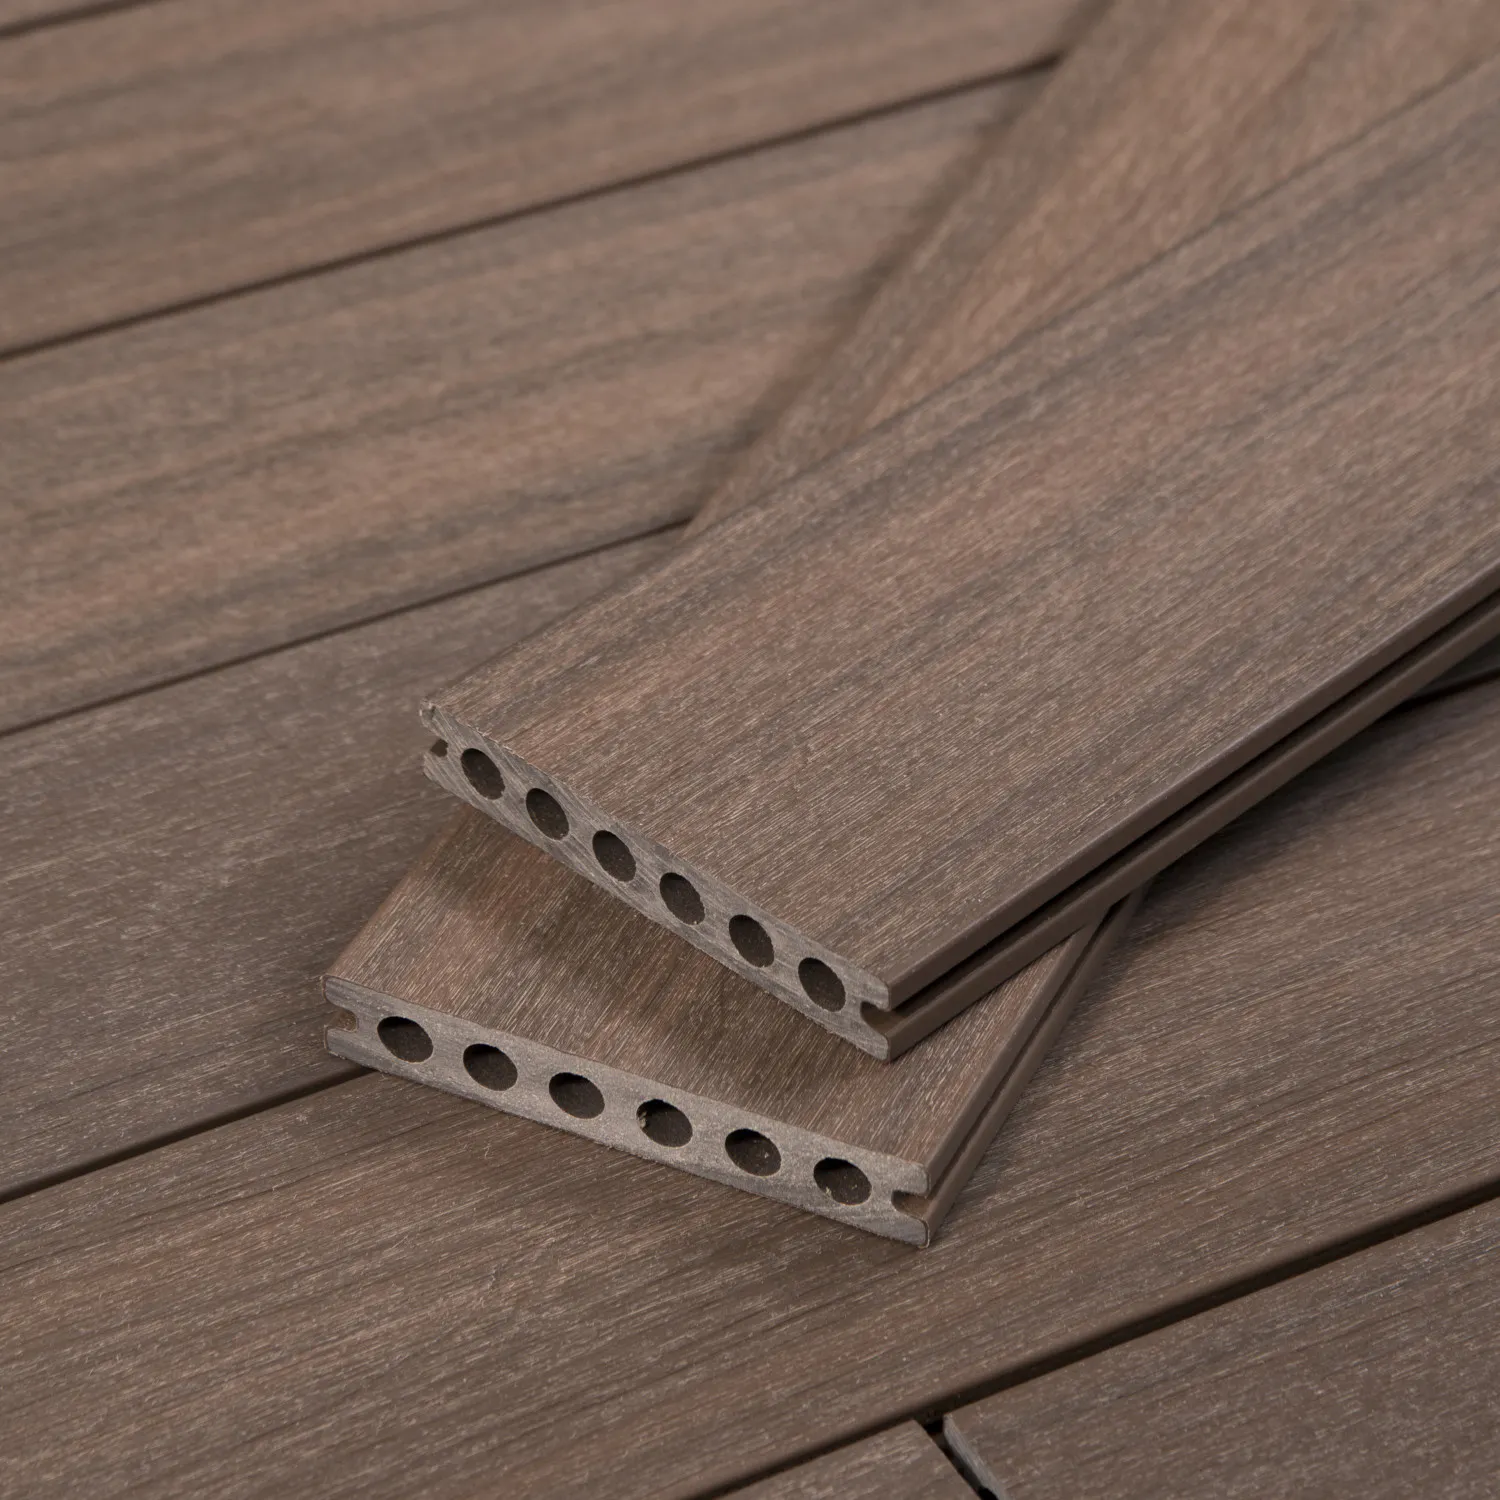 Wood-textured laminate flooring planks with interlocking edges designed for next deck types of decking, sitting on a wooden surface.